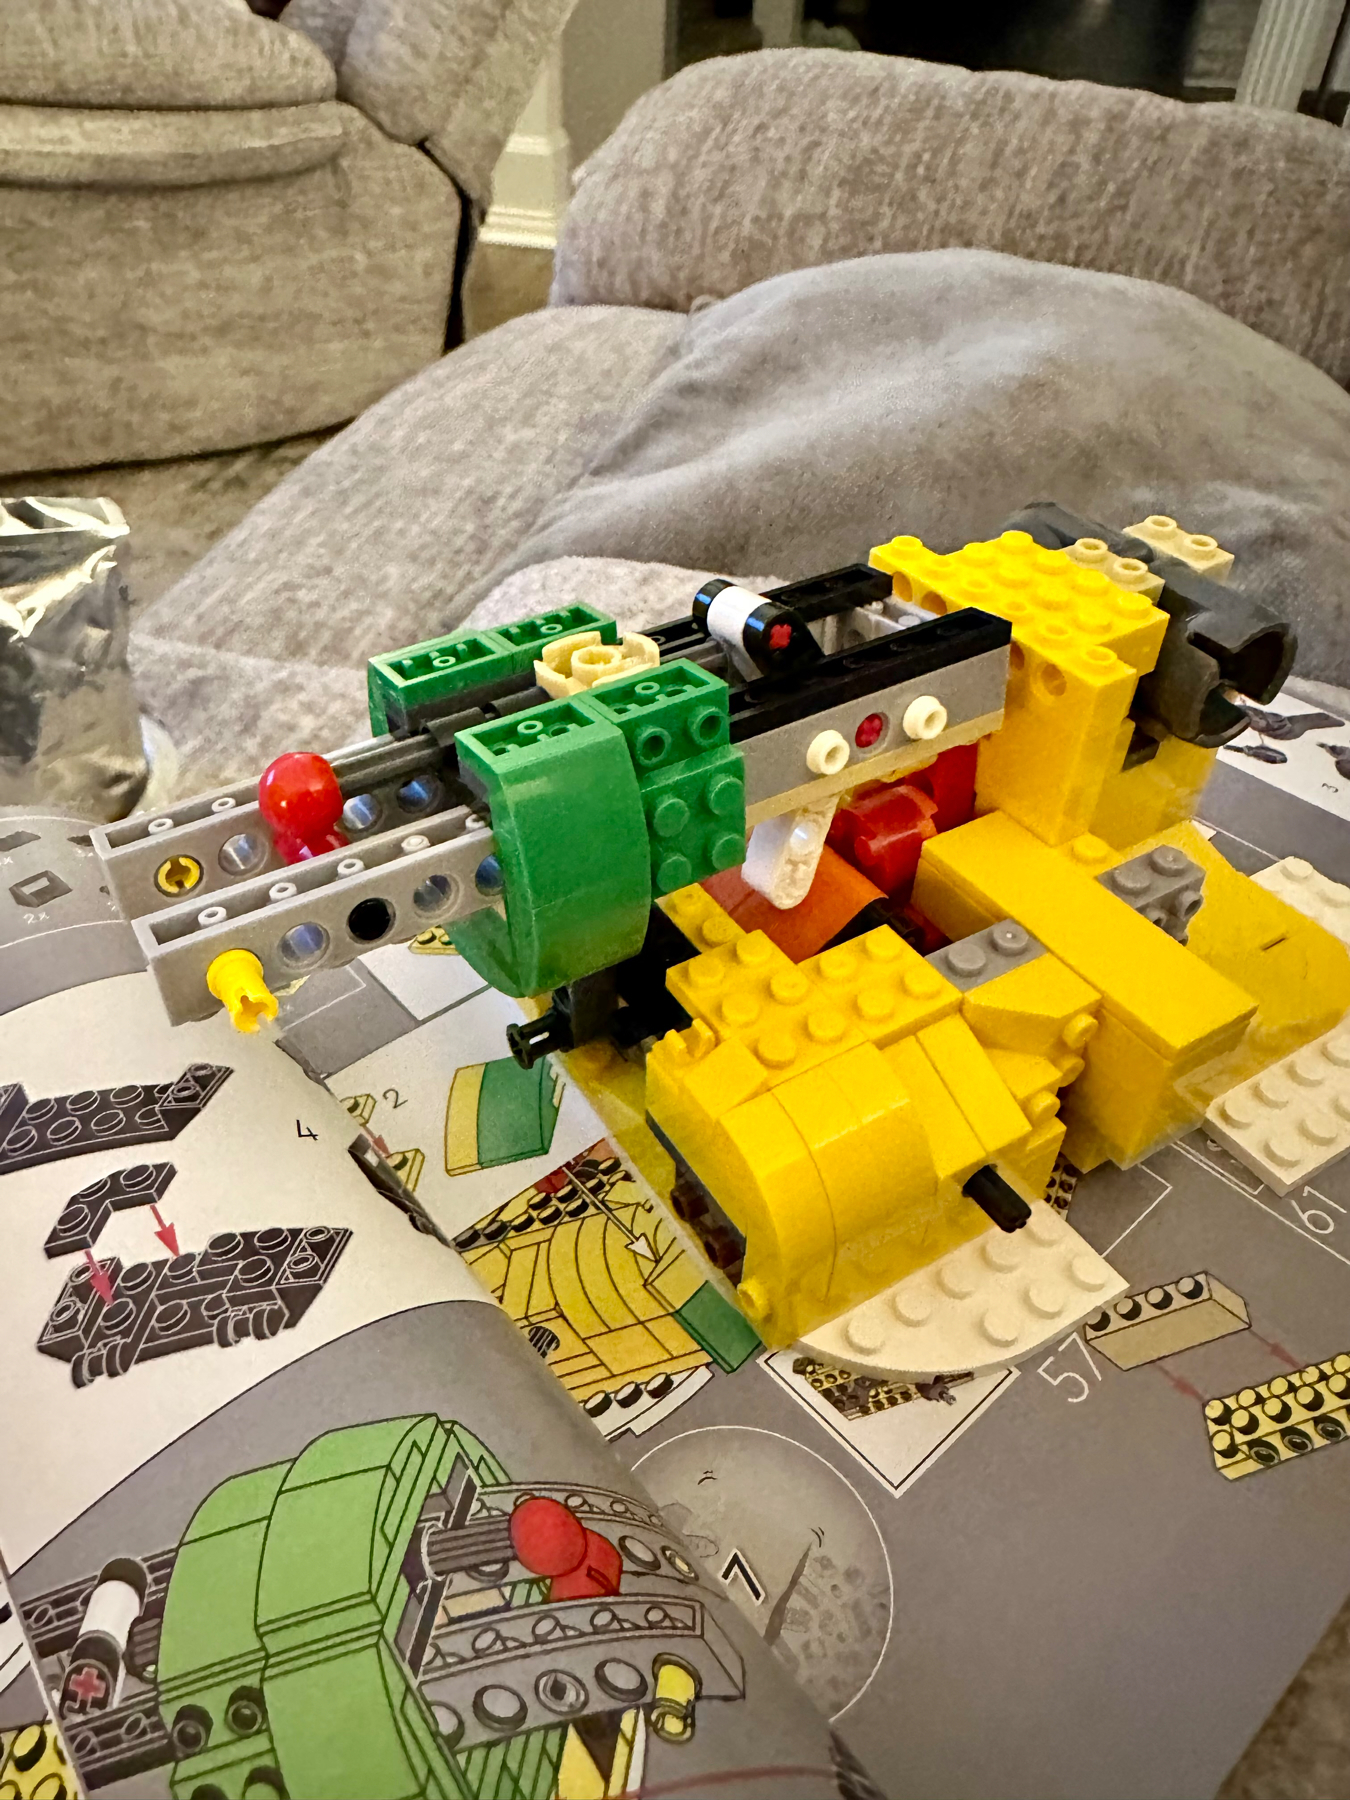 A partially assembled LEGO set resembling a robotic creature or vehicle with green, yellow, and red pieces, resting on an open instruction manual, with a blurred background of a cushioned chair and a blanket.